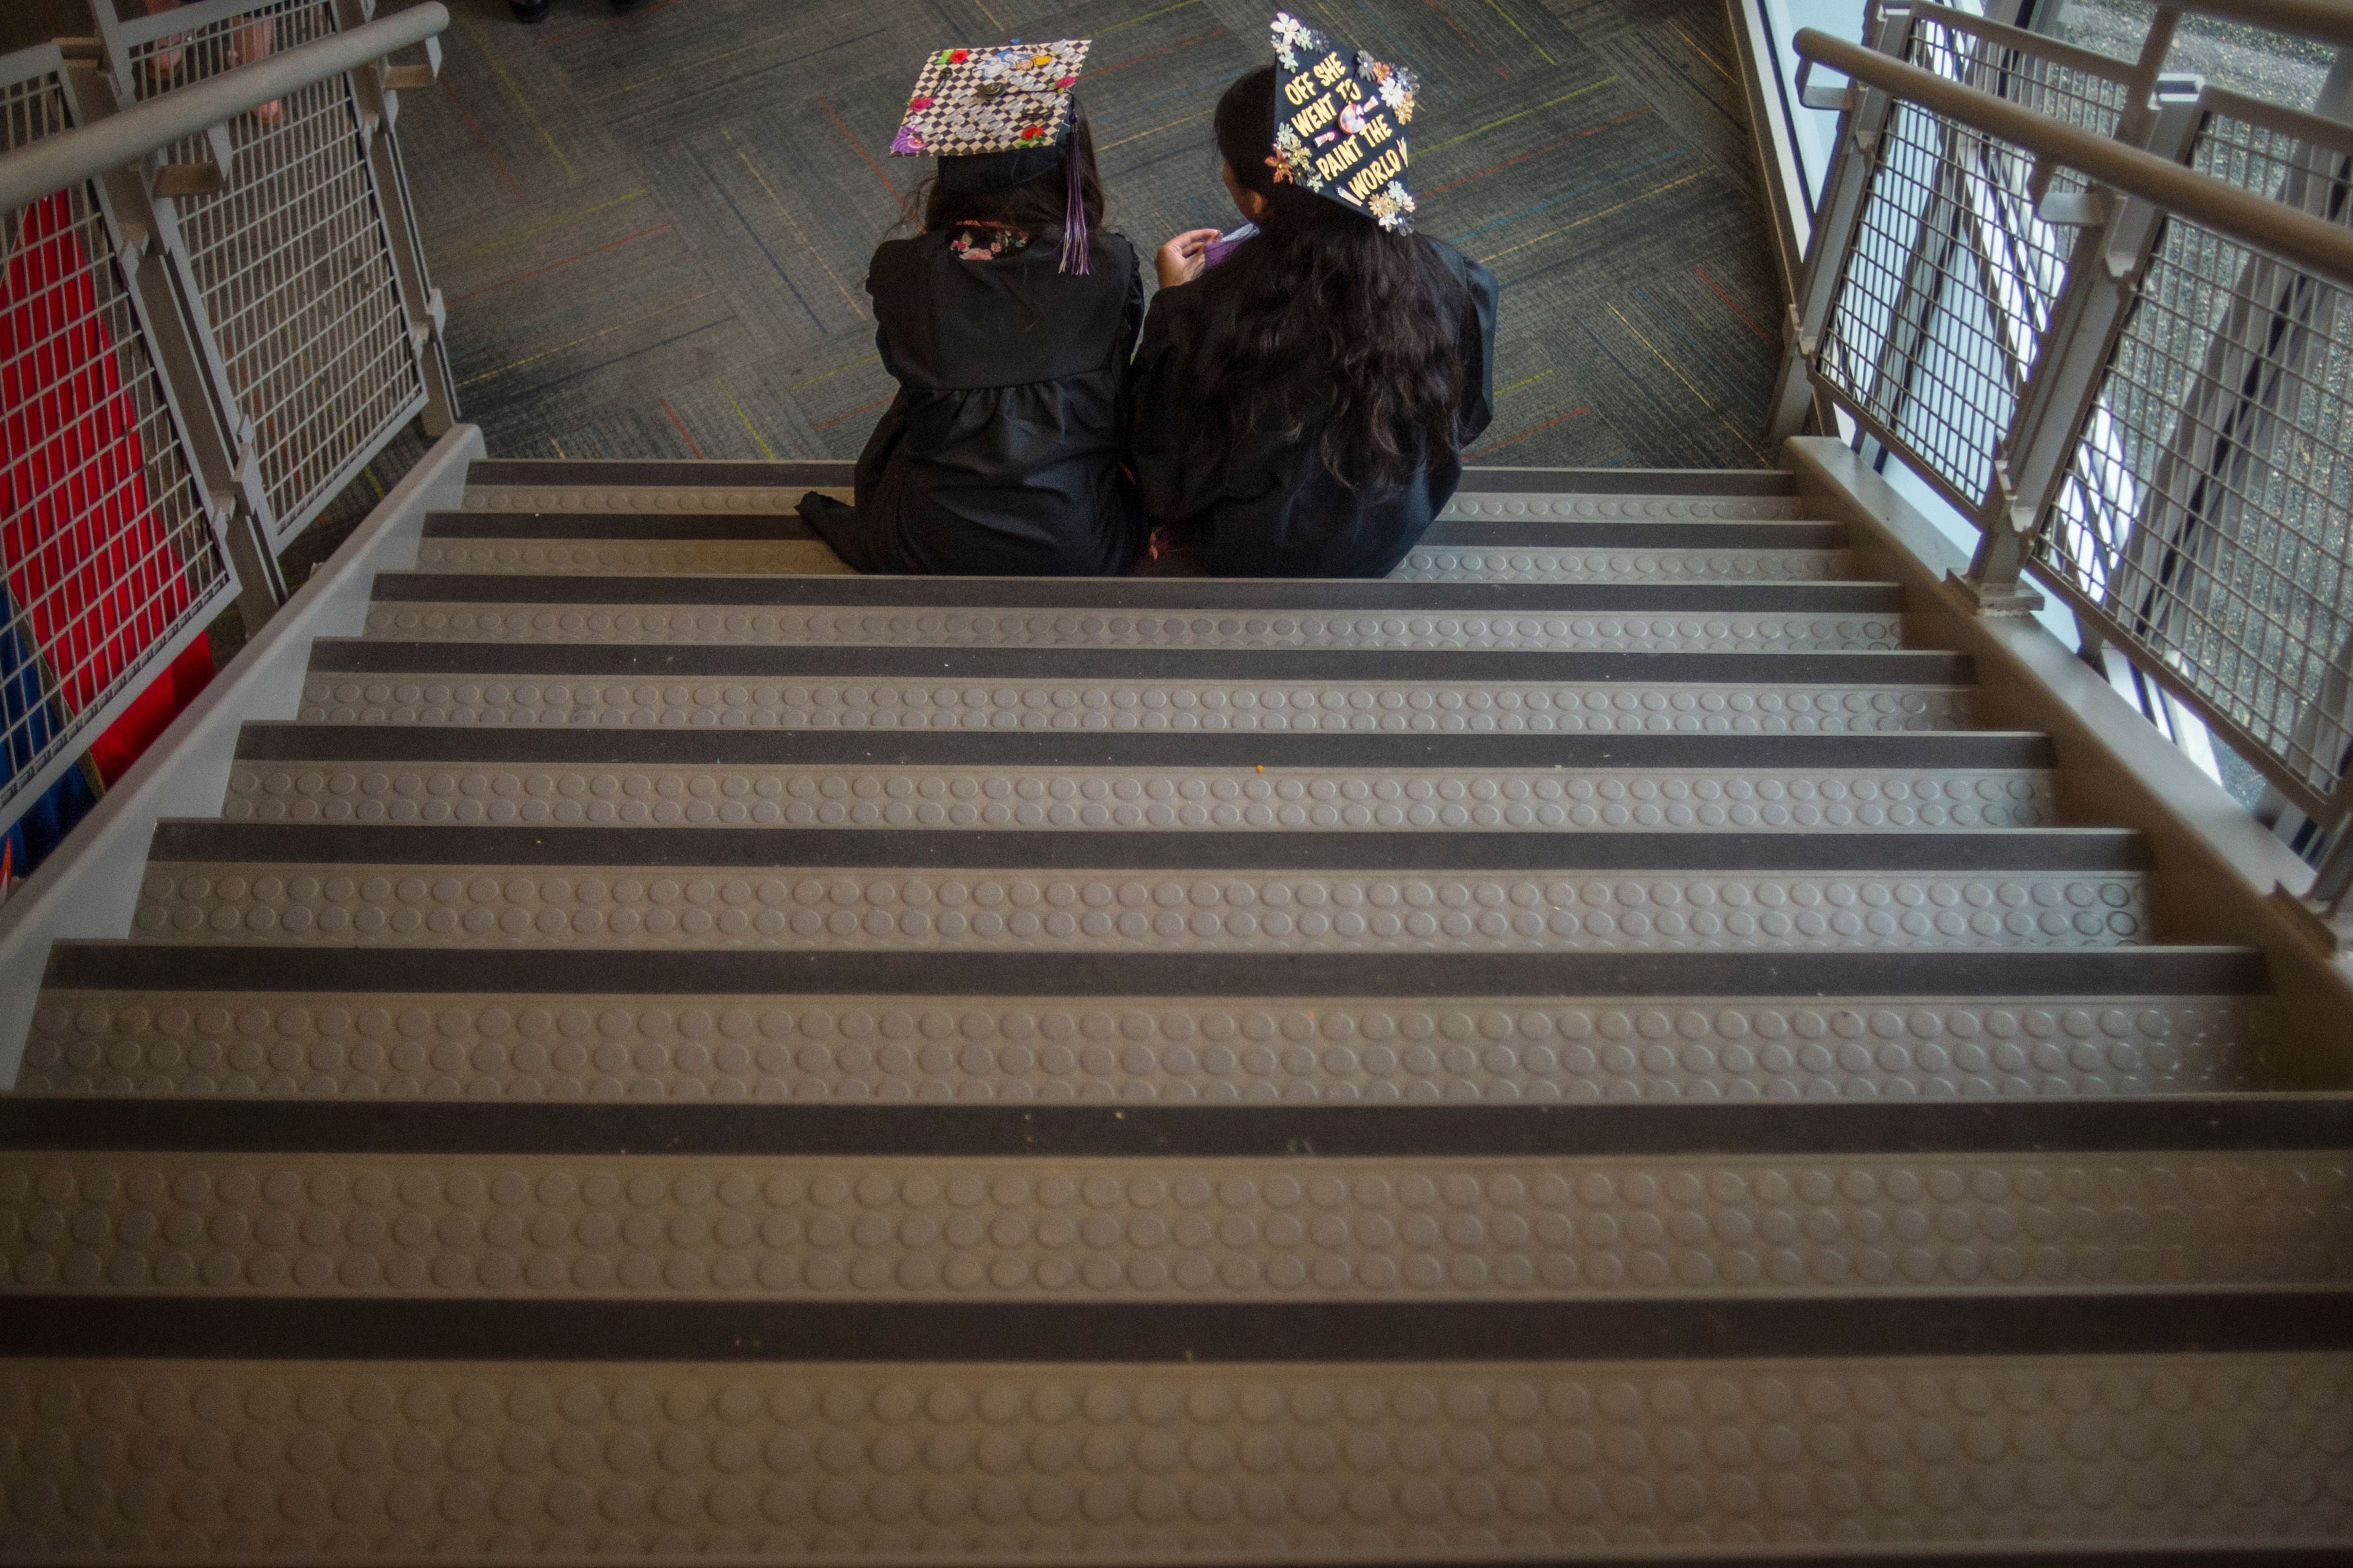 High school graduates in caps and gowns sit on a staircase.